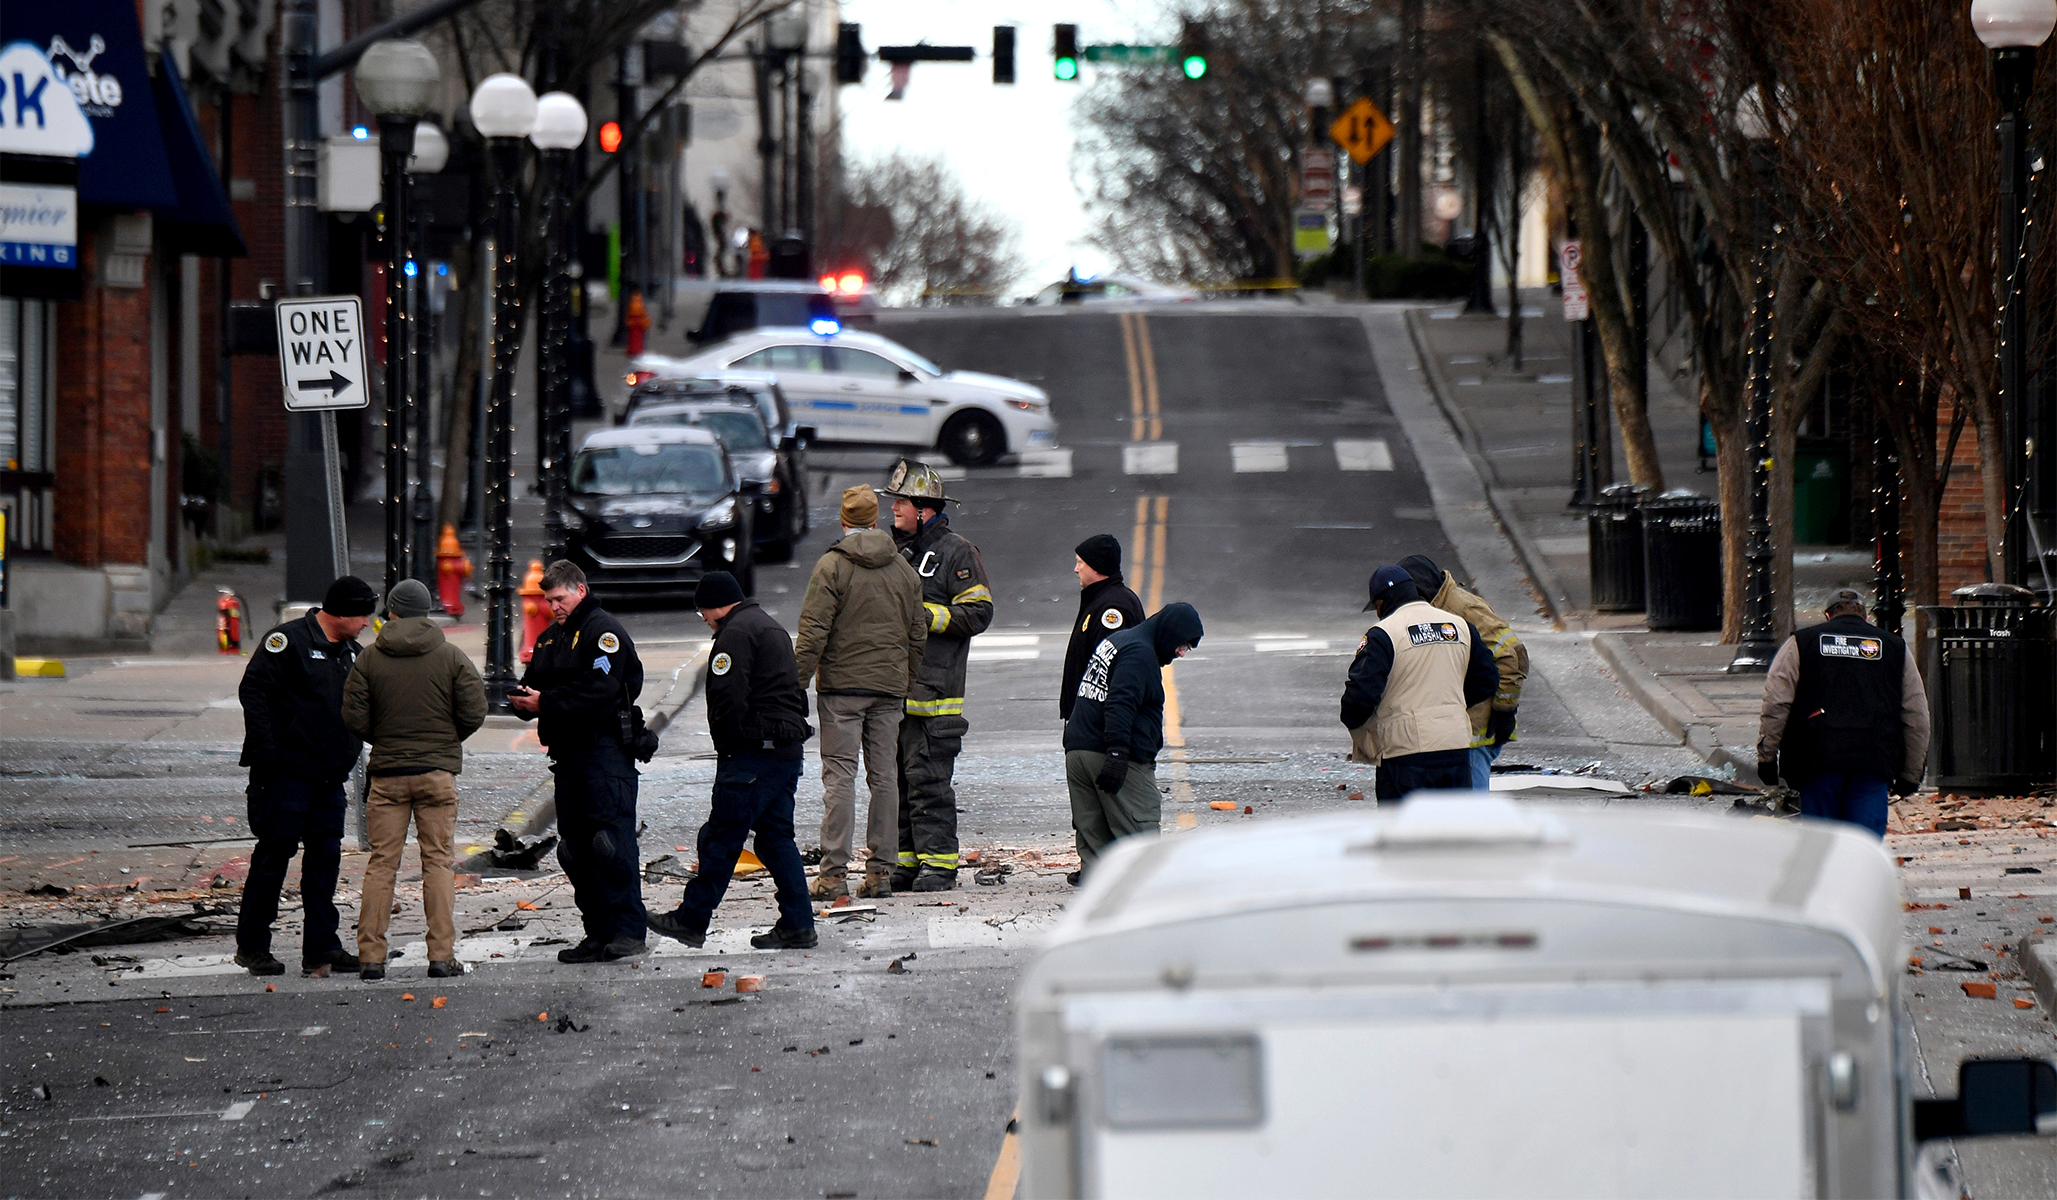 Nashville Bombing What Happened? National Review